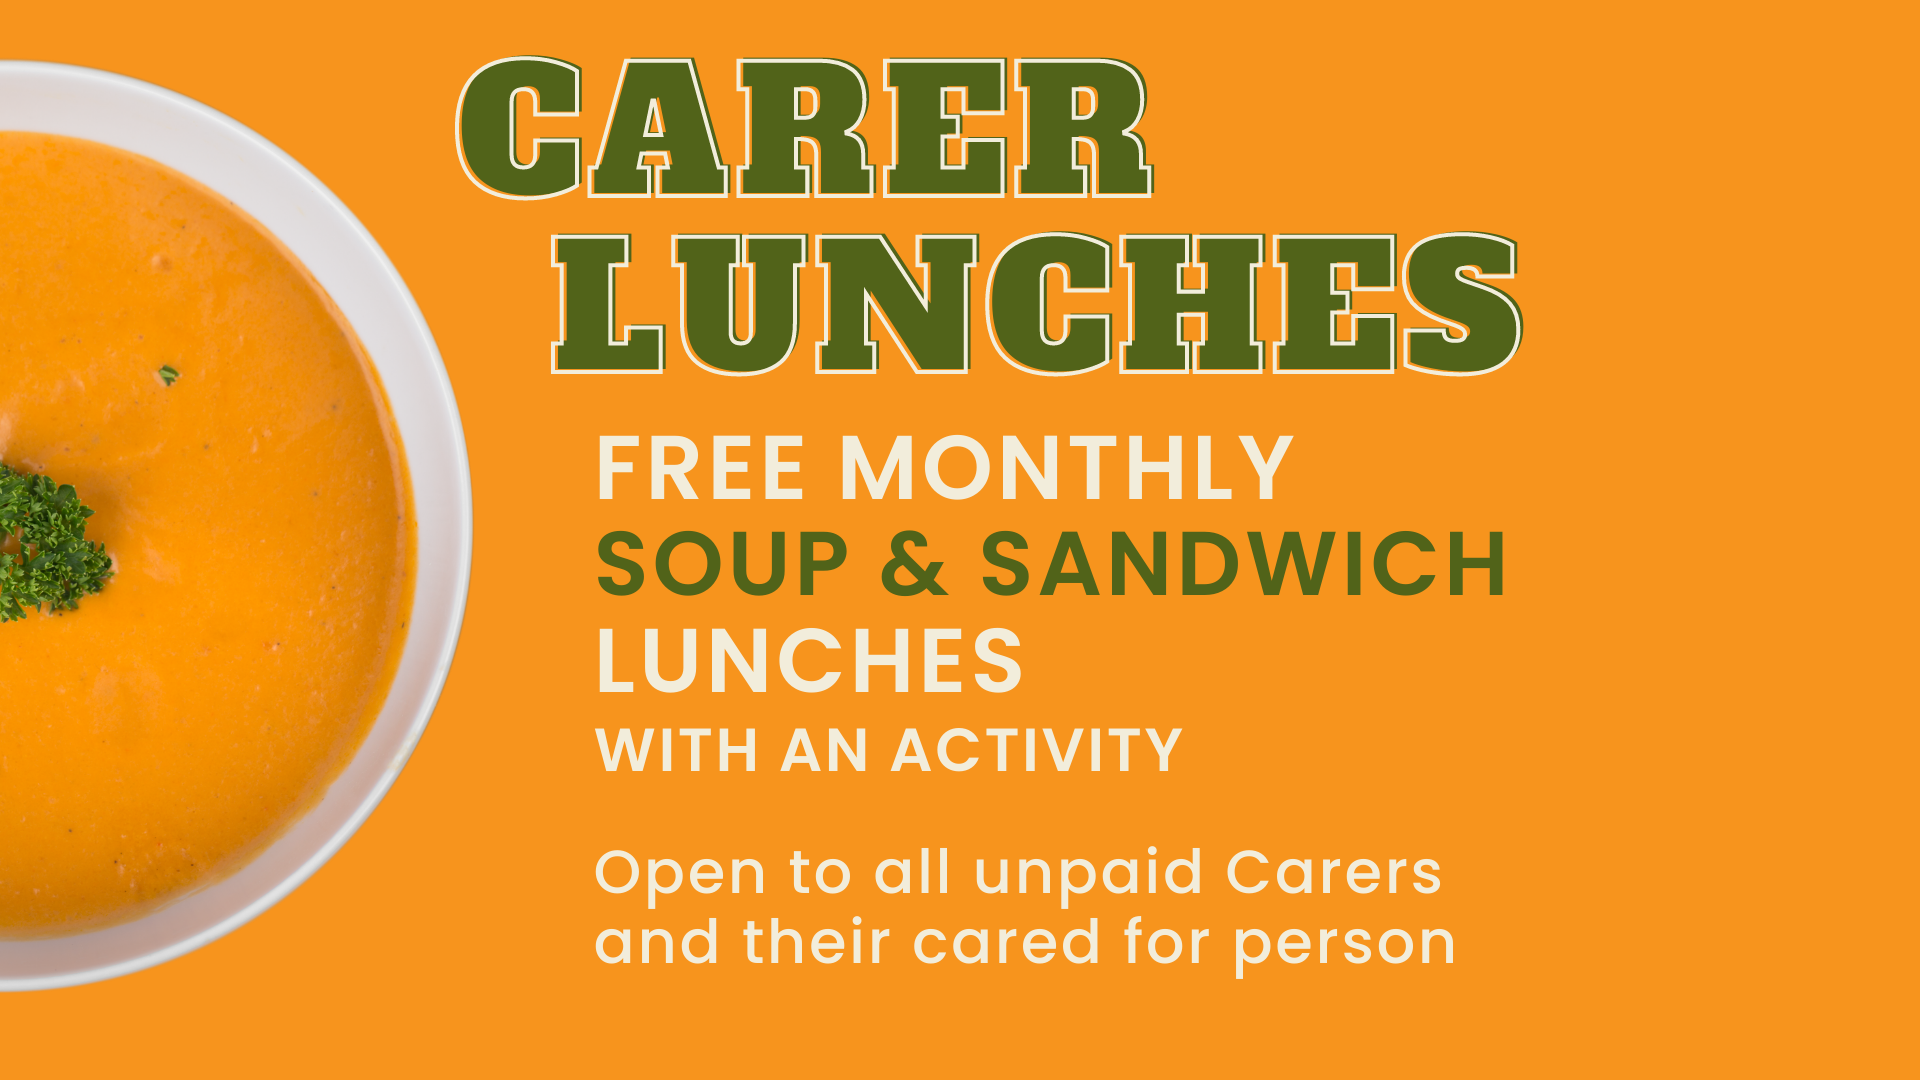 CARER LUNCHES - FREE MONTHLY SOUP & SANDWICH LUNCHES WITH AN ACTIVITY Open to all unpaid Carers and their cared for person